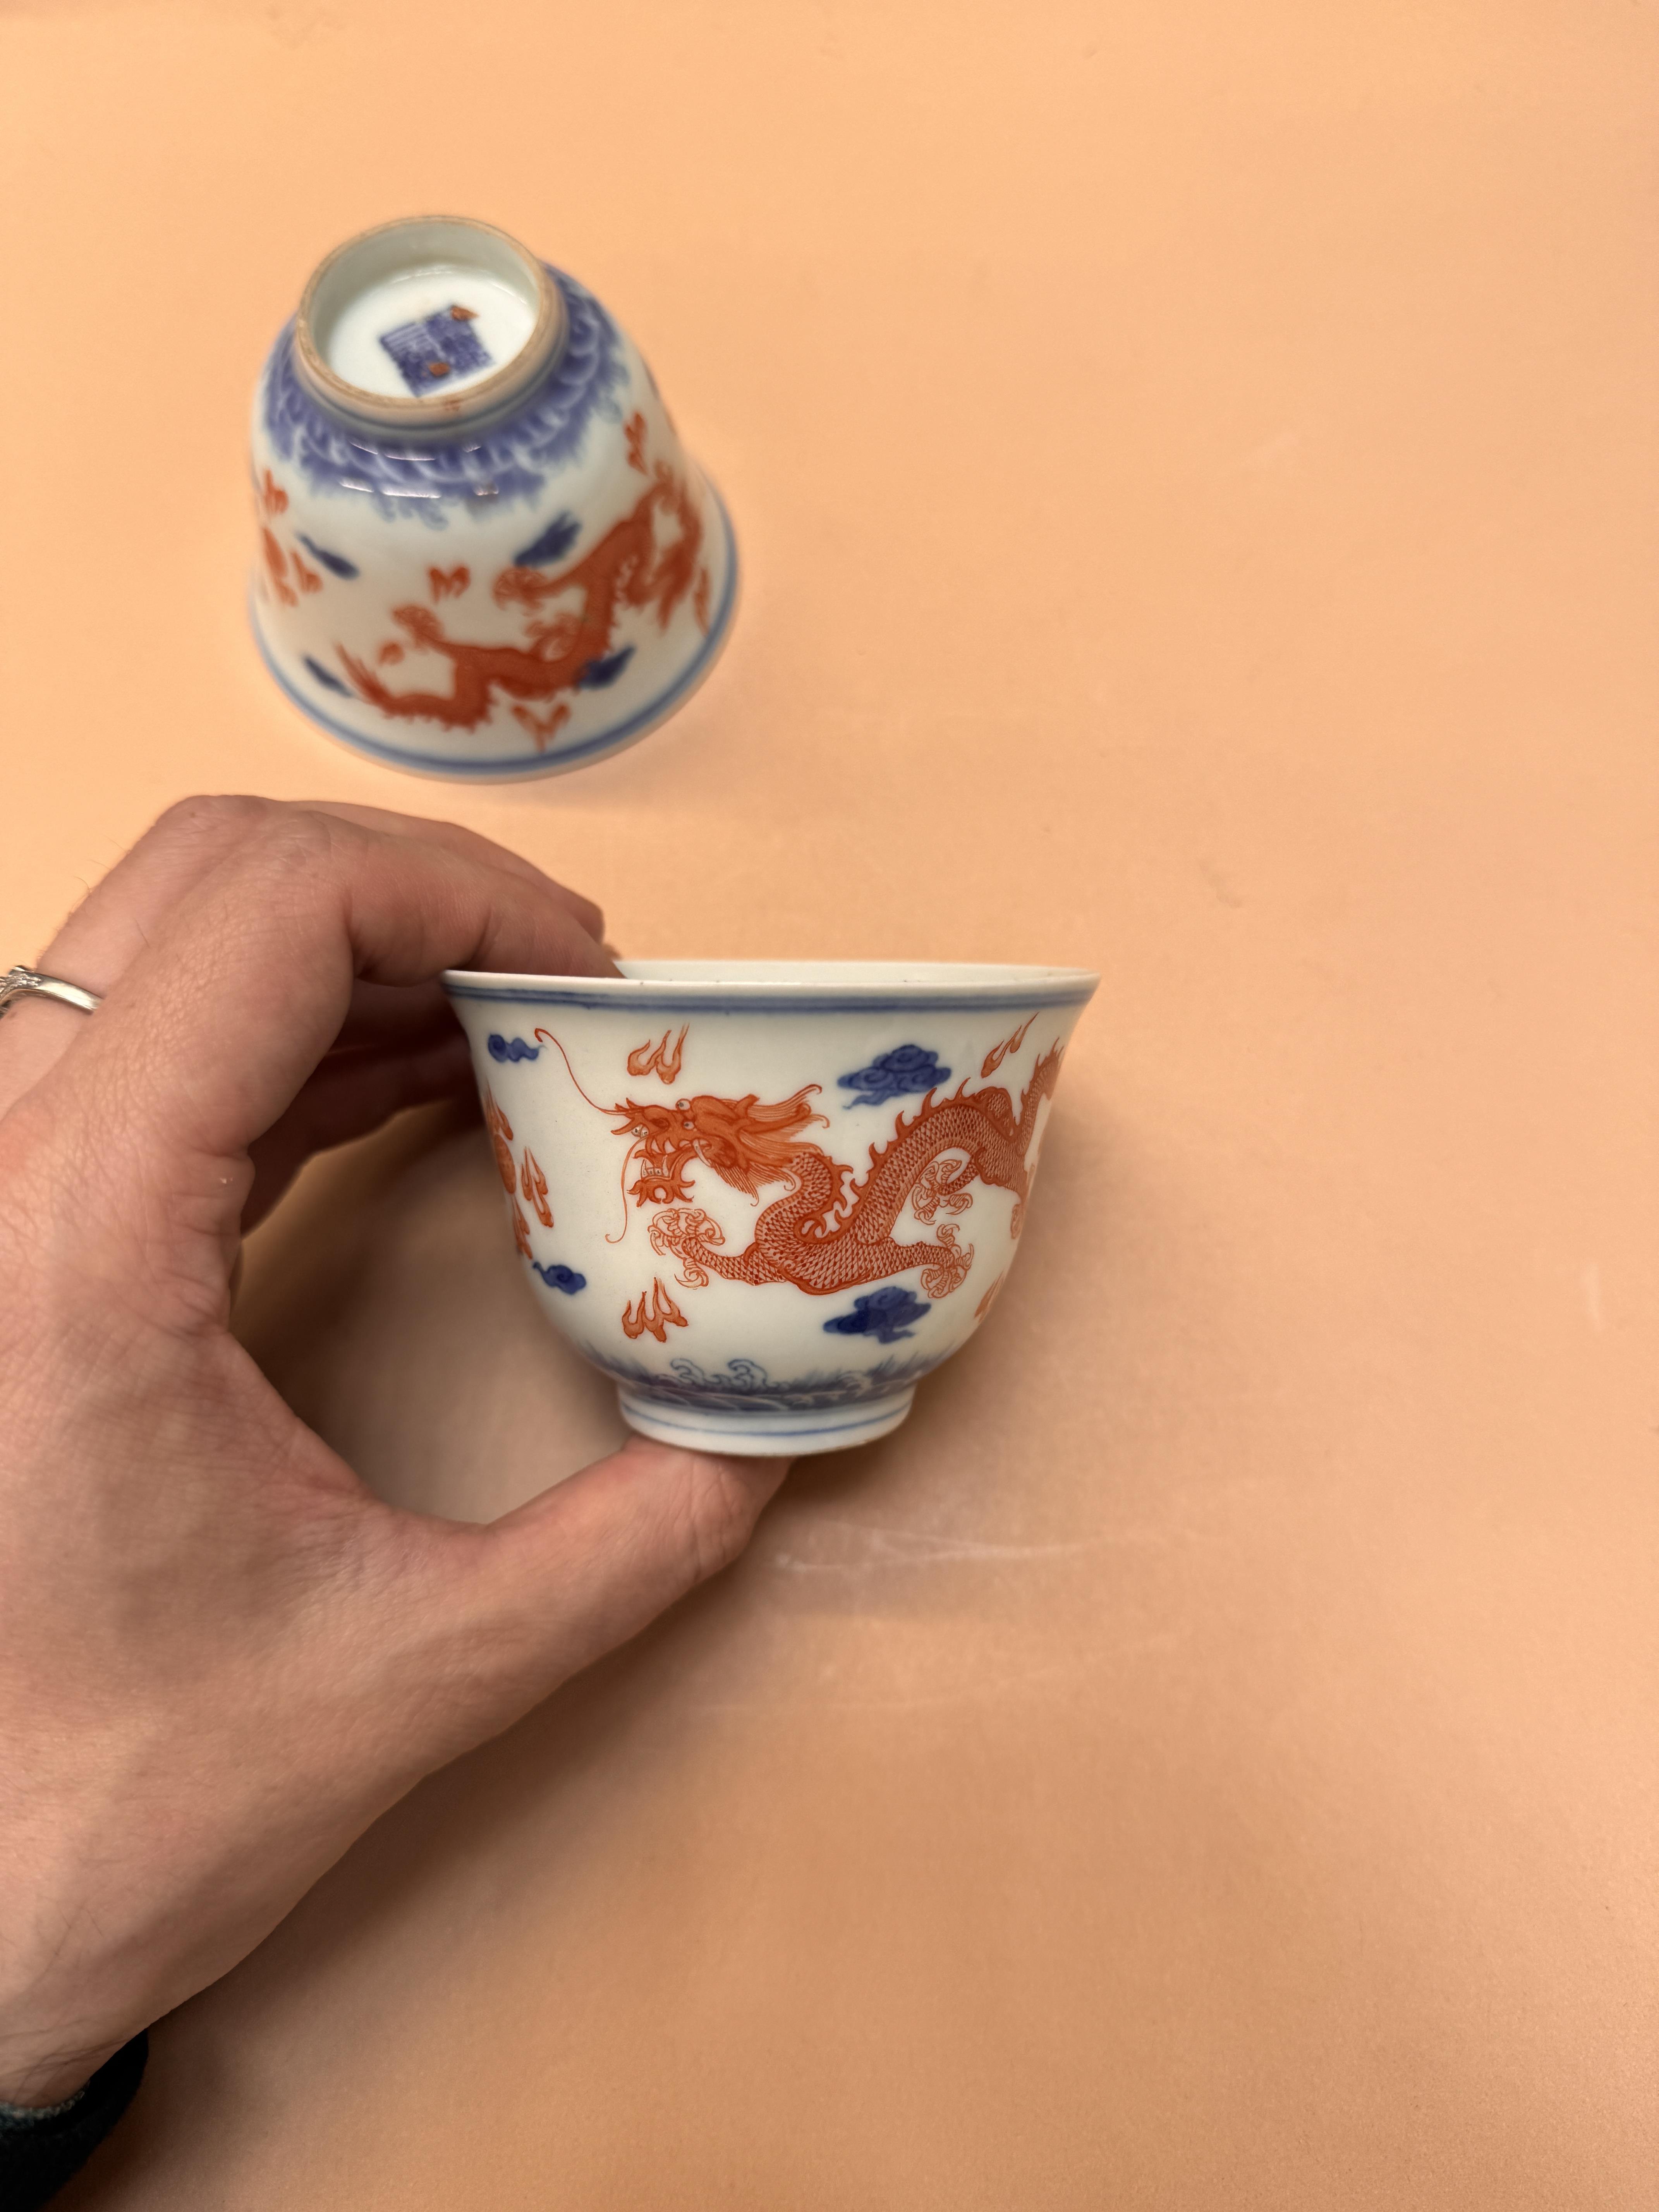 A PAIR OF CHINESE BLUE AND WHITE AND IRON-RED 'DRAGON' CUPS 清嘉慶 青花釉裡紅龍紋盃 - Image 16 of 19